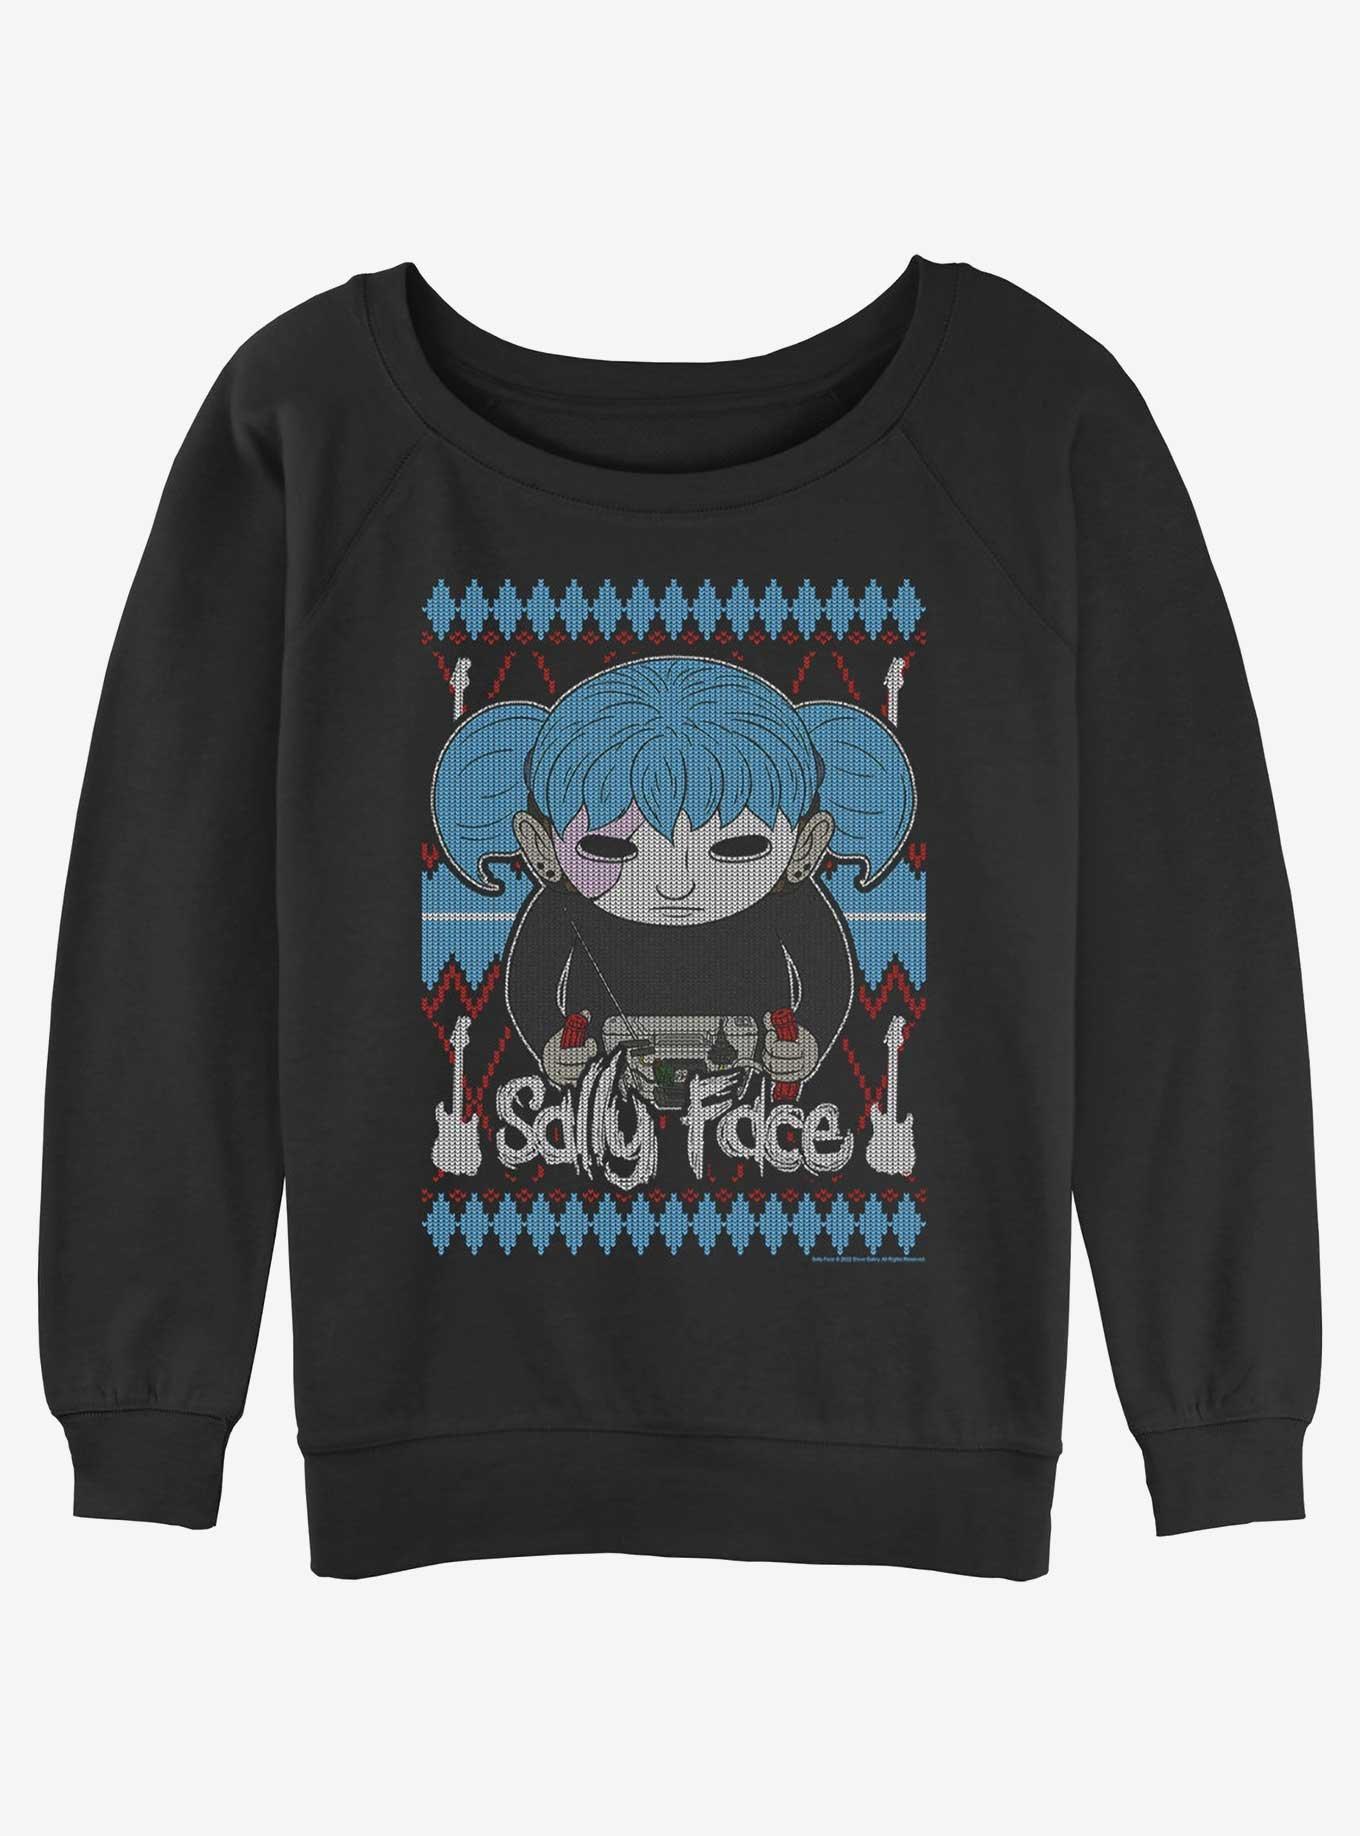 Sally Face Ugly Sweater Girls Slouchy Sweatshirt, BLACK, hi-res